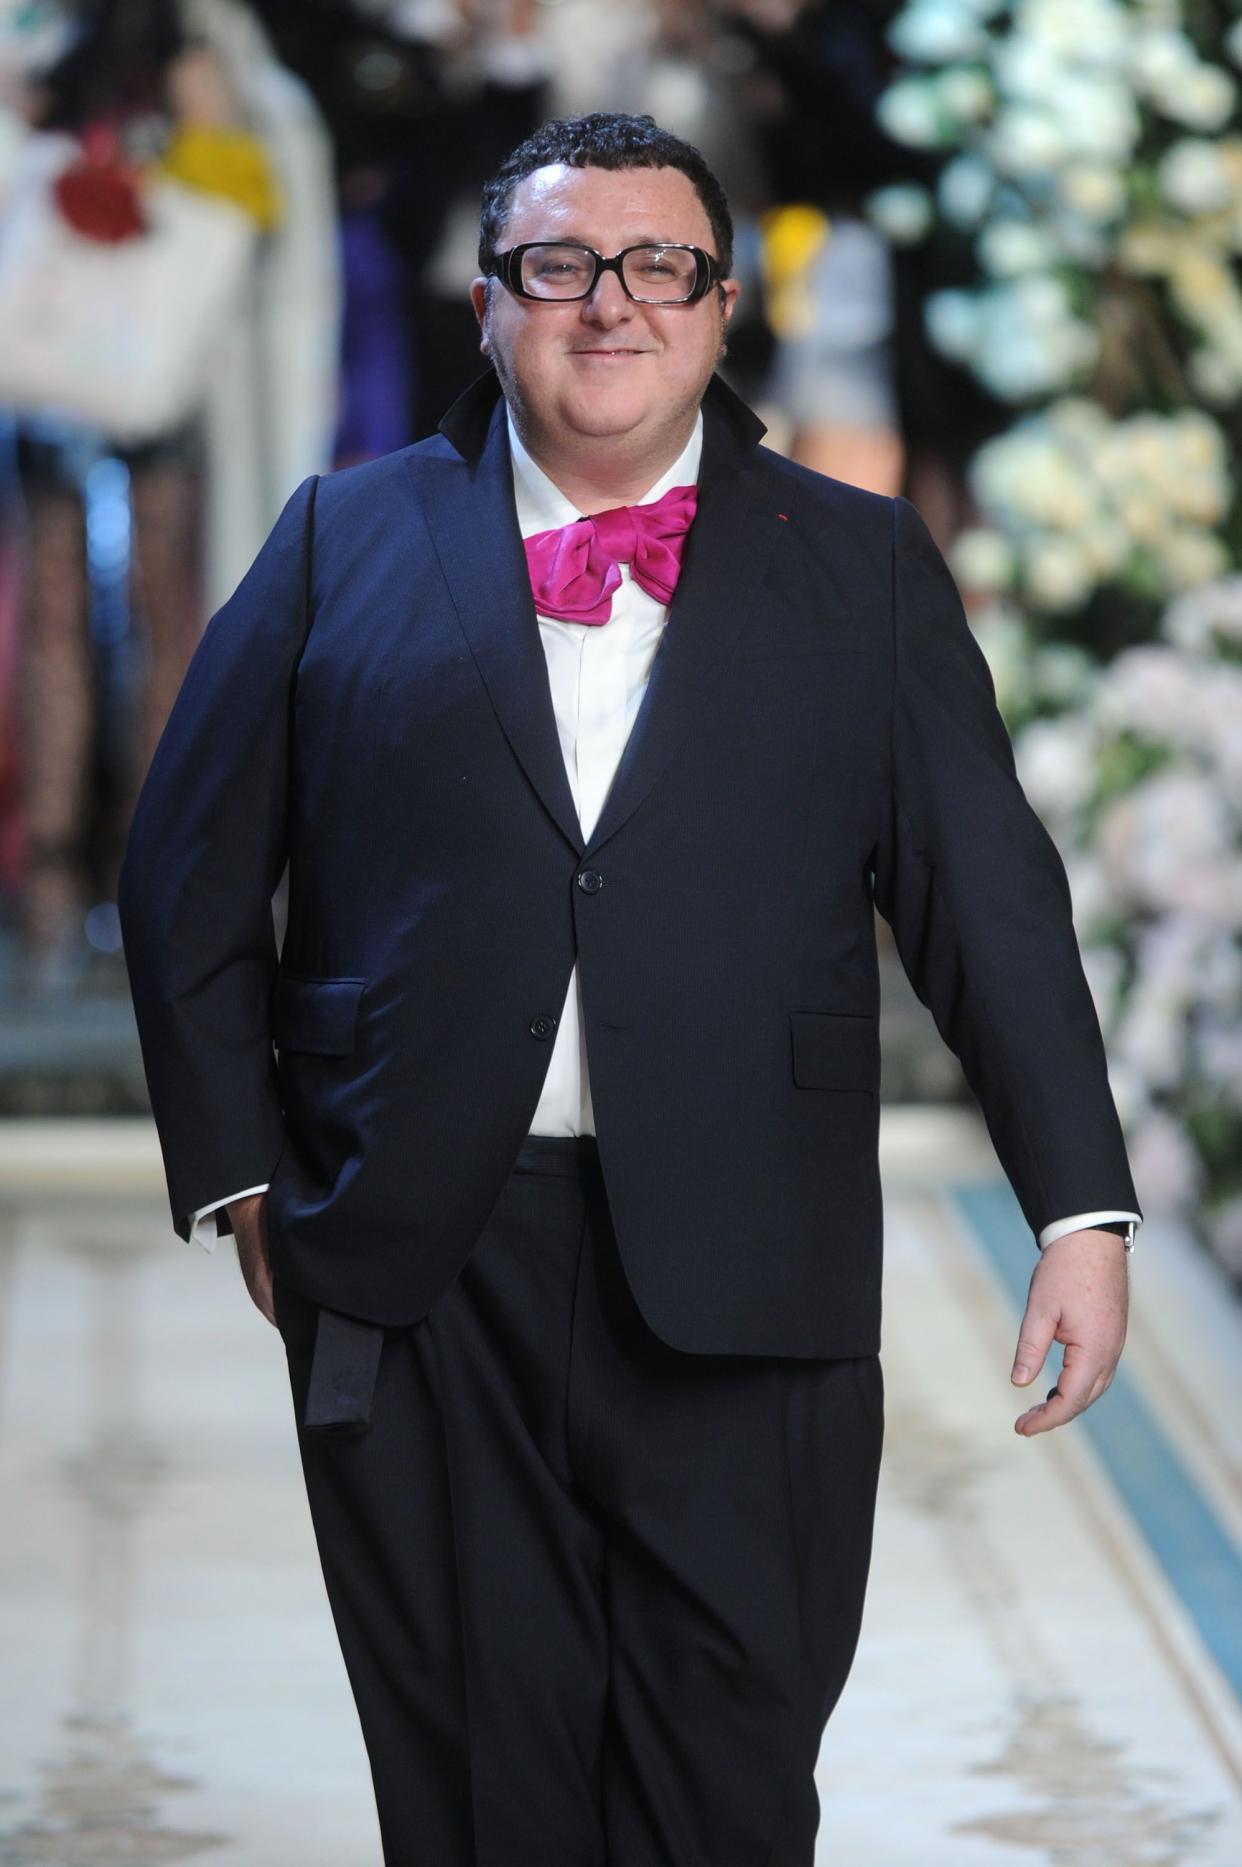 Designer Alber Elbaz, the Israeli designer responsible for breathing life back into top Paris fashion house Lanvin, died Saturday, April 24, 2021, from COVID-19. He was 59.